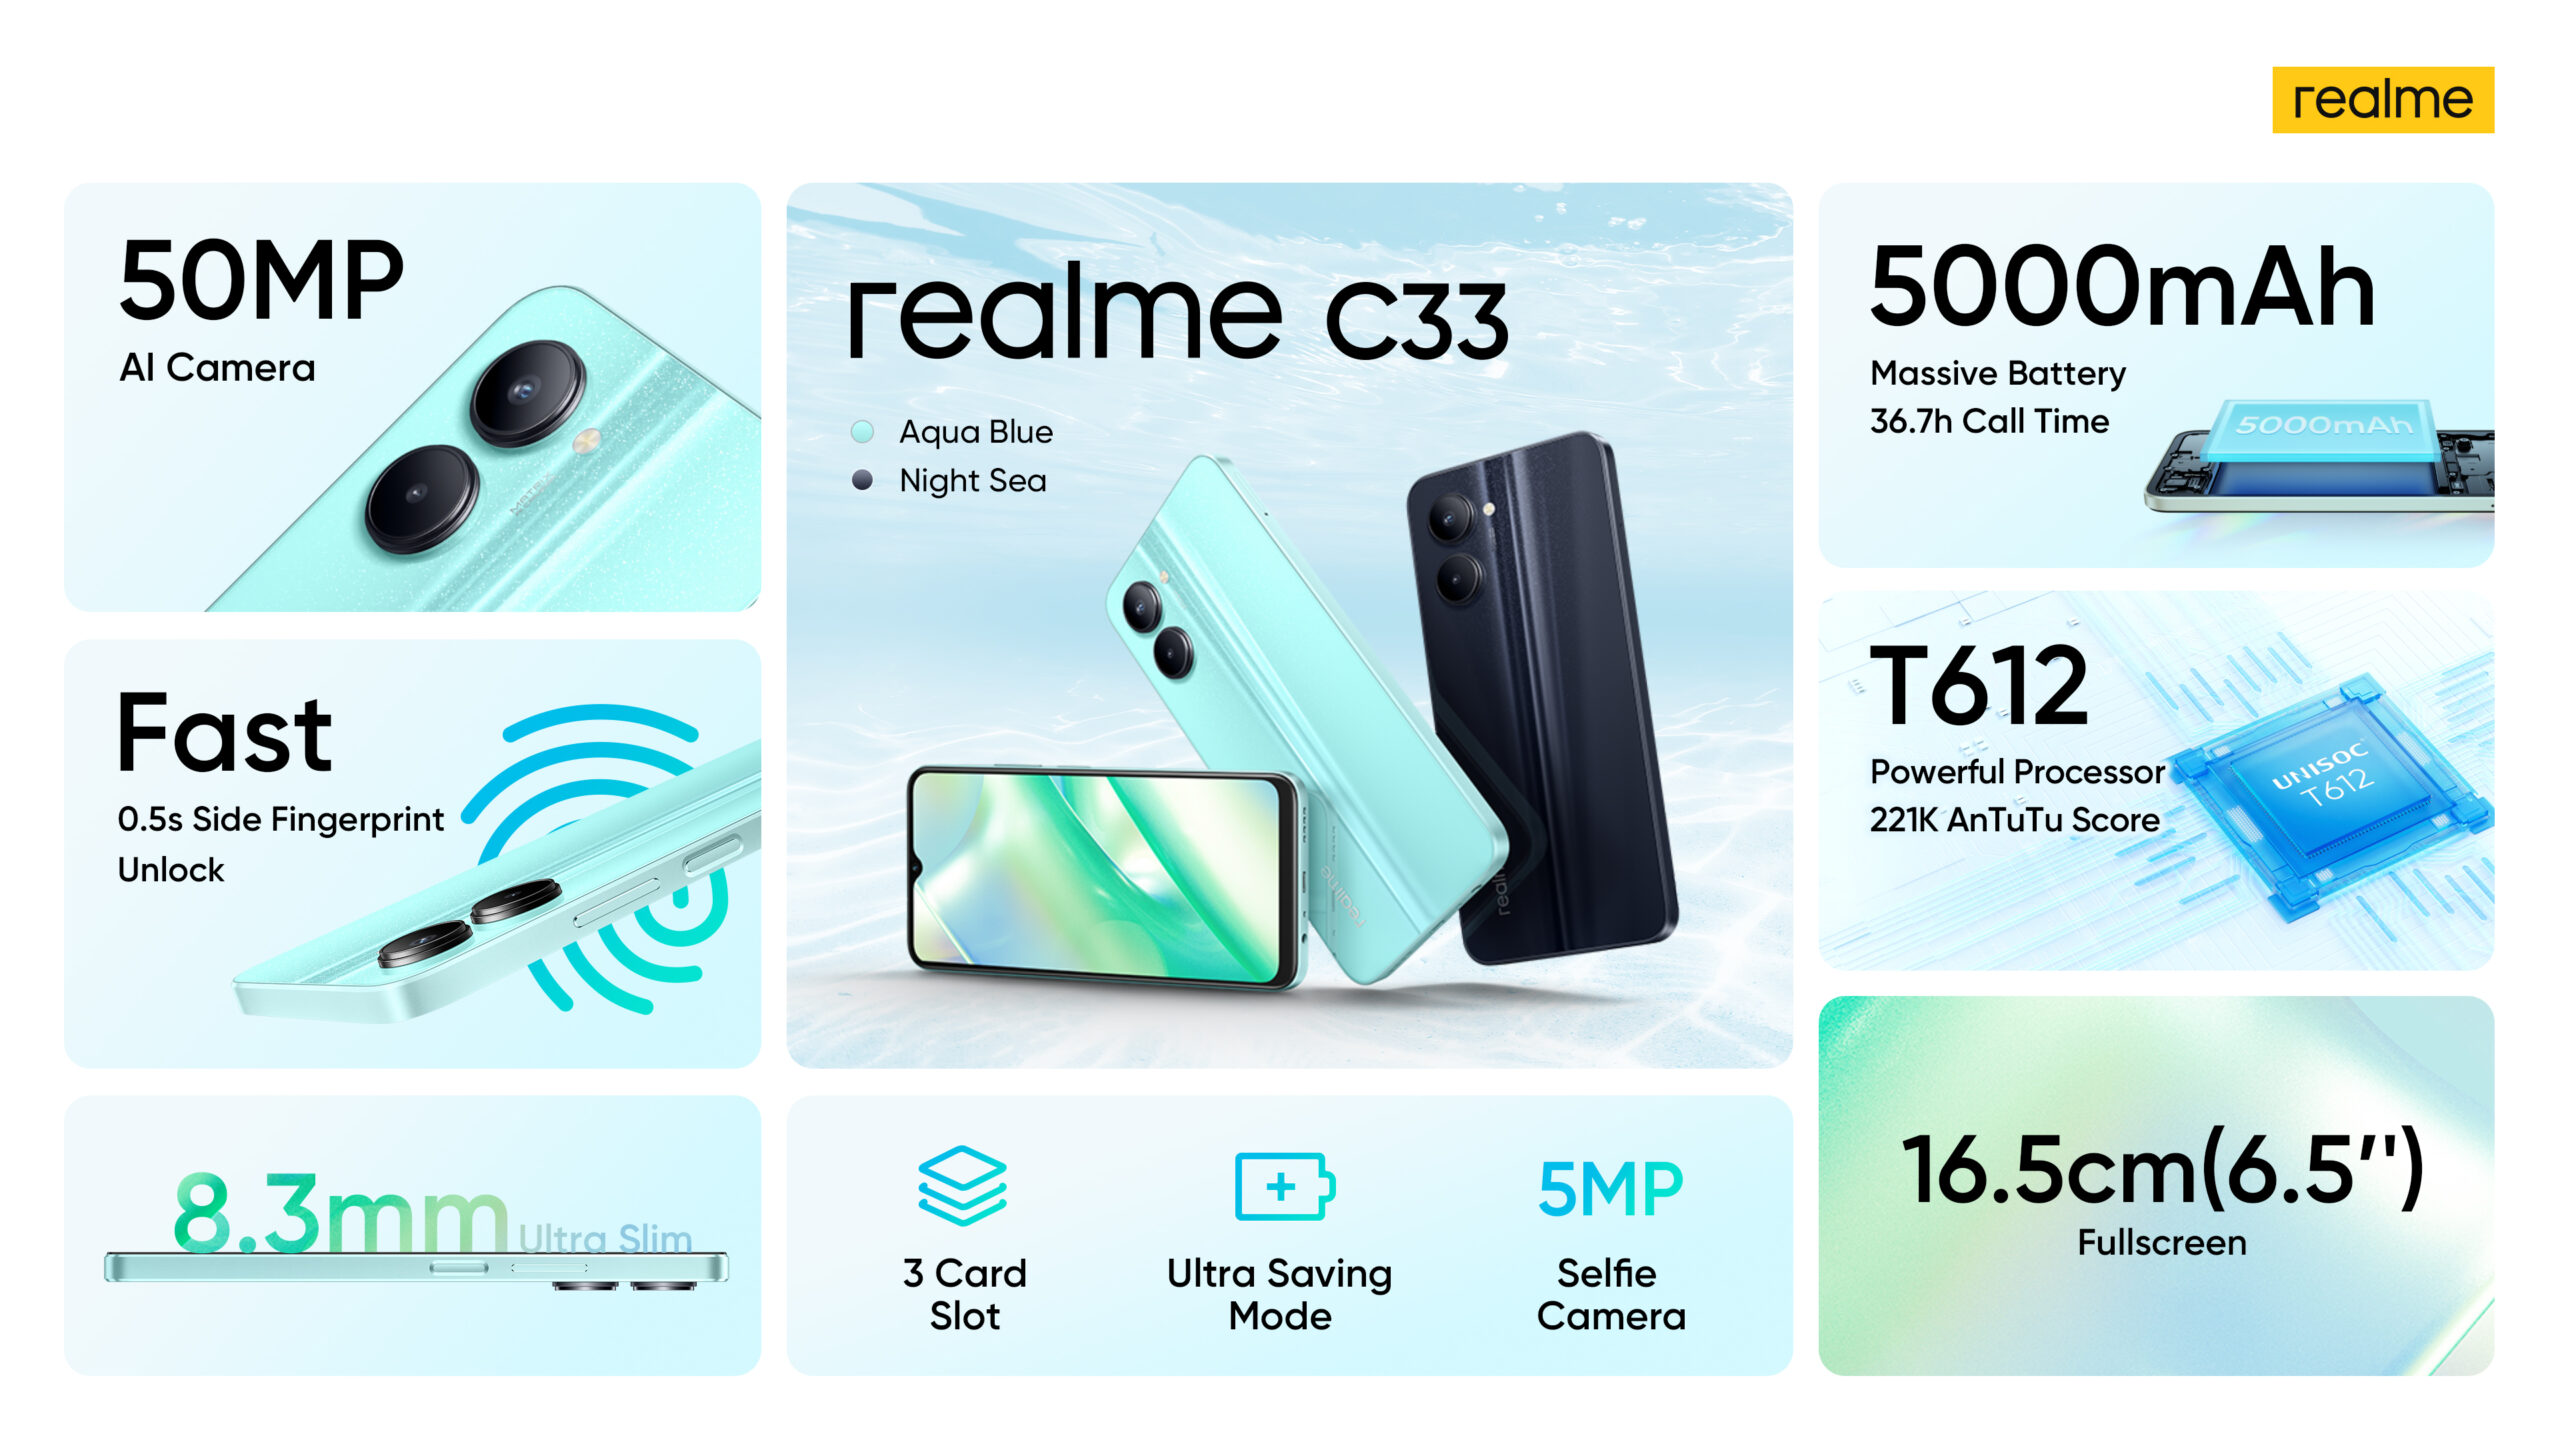 realme C33 product information scaled